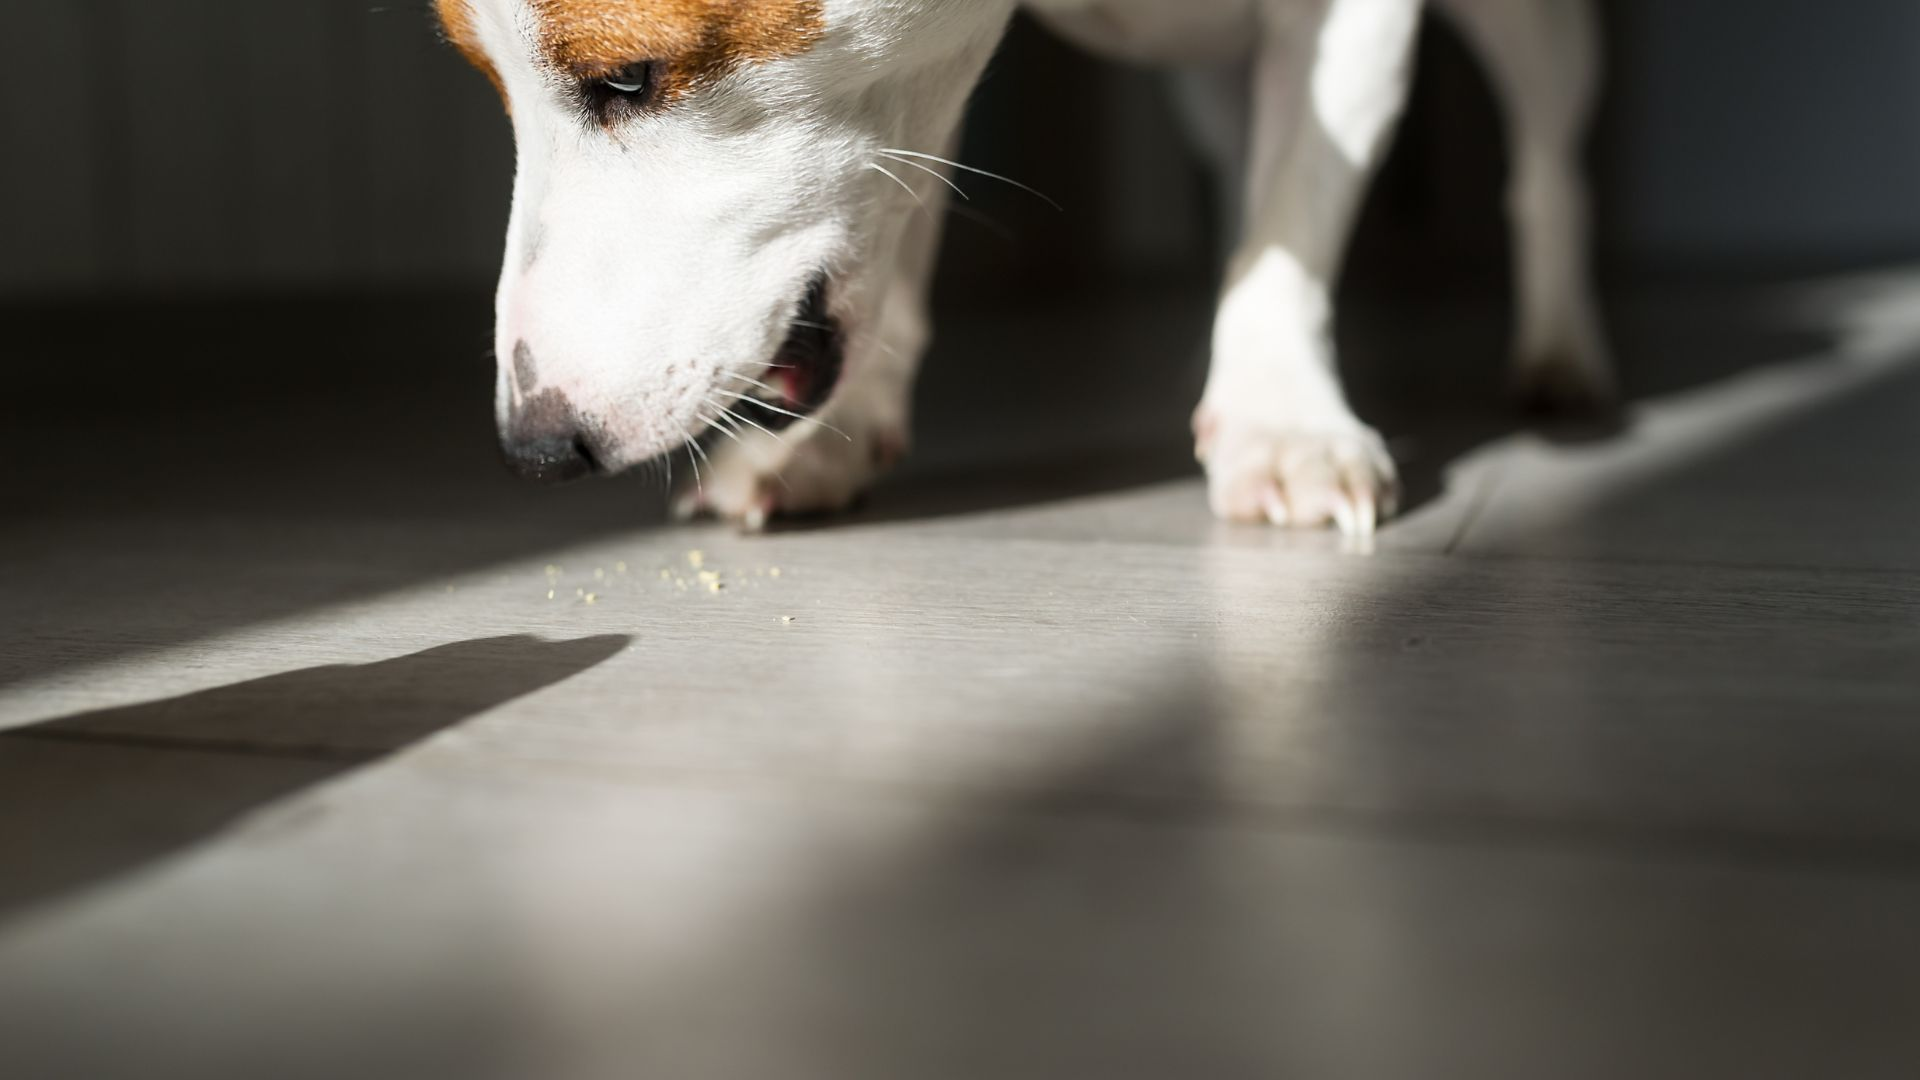 An image of a dog dropping pet food crumbs onto the floor.